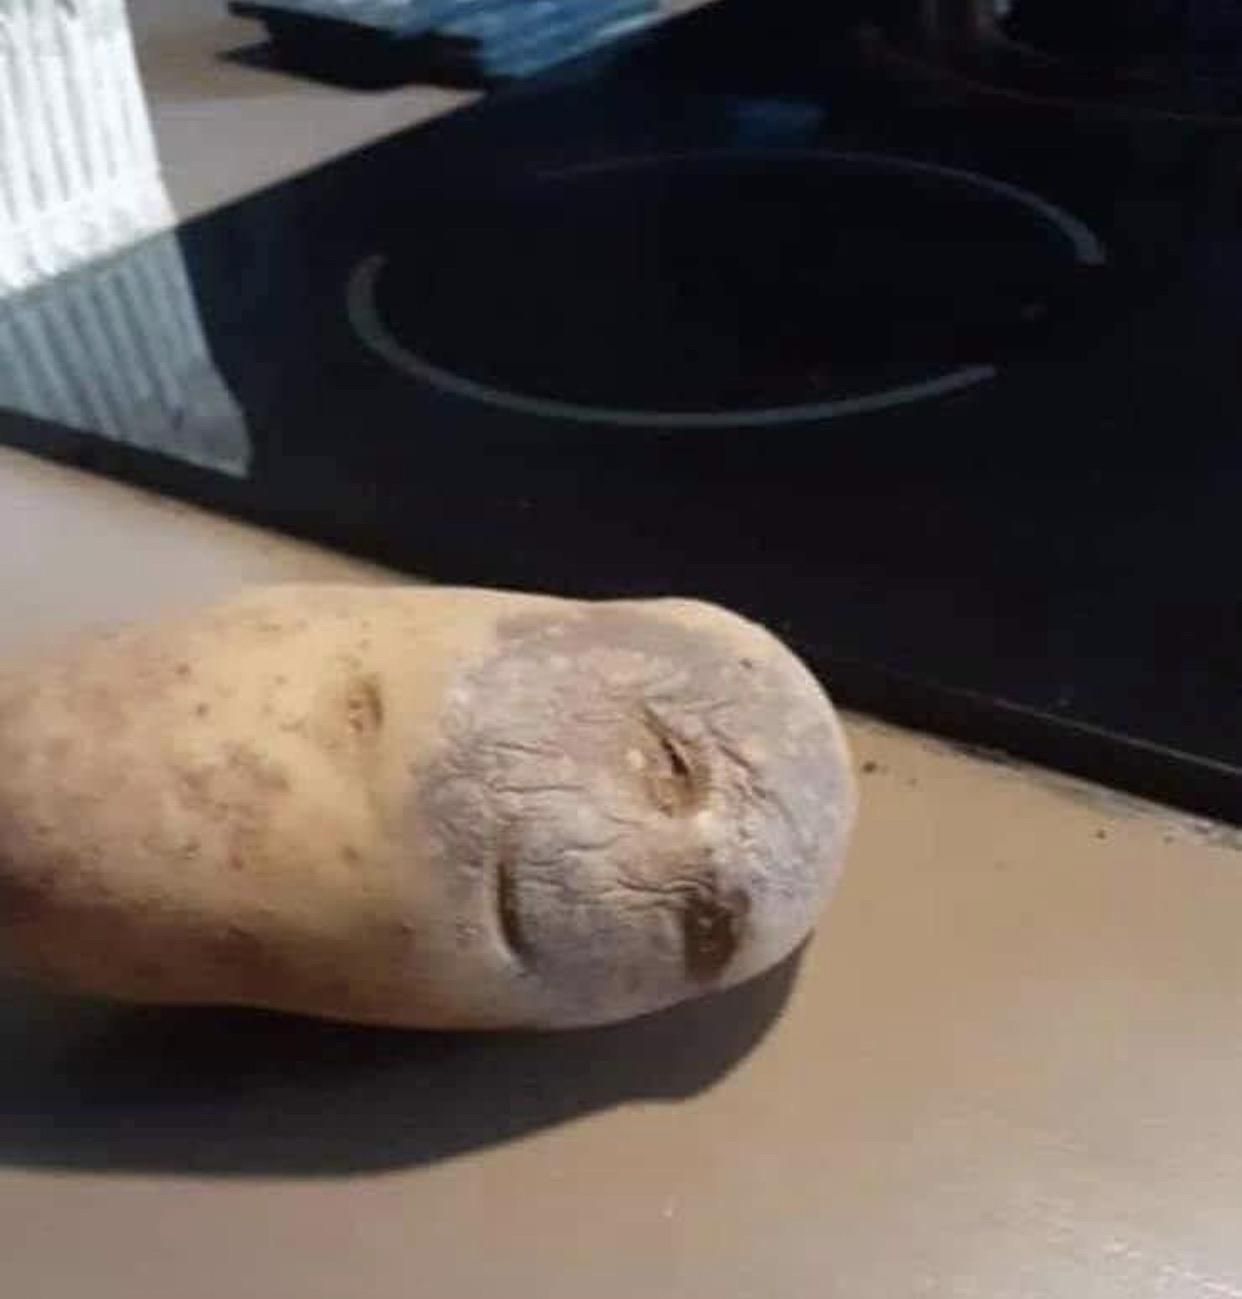 I don’t know if I should cook this potato, or take it to the hospital?